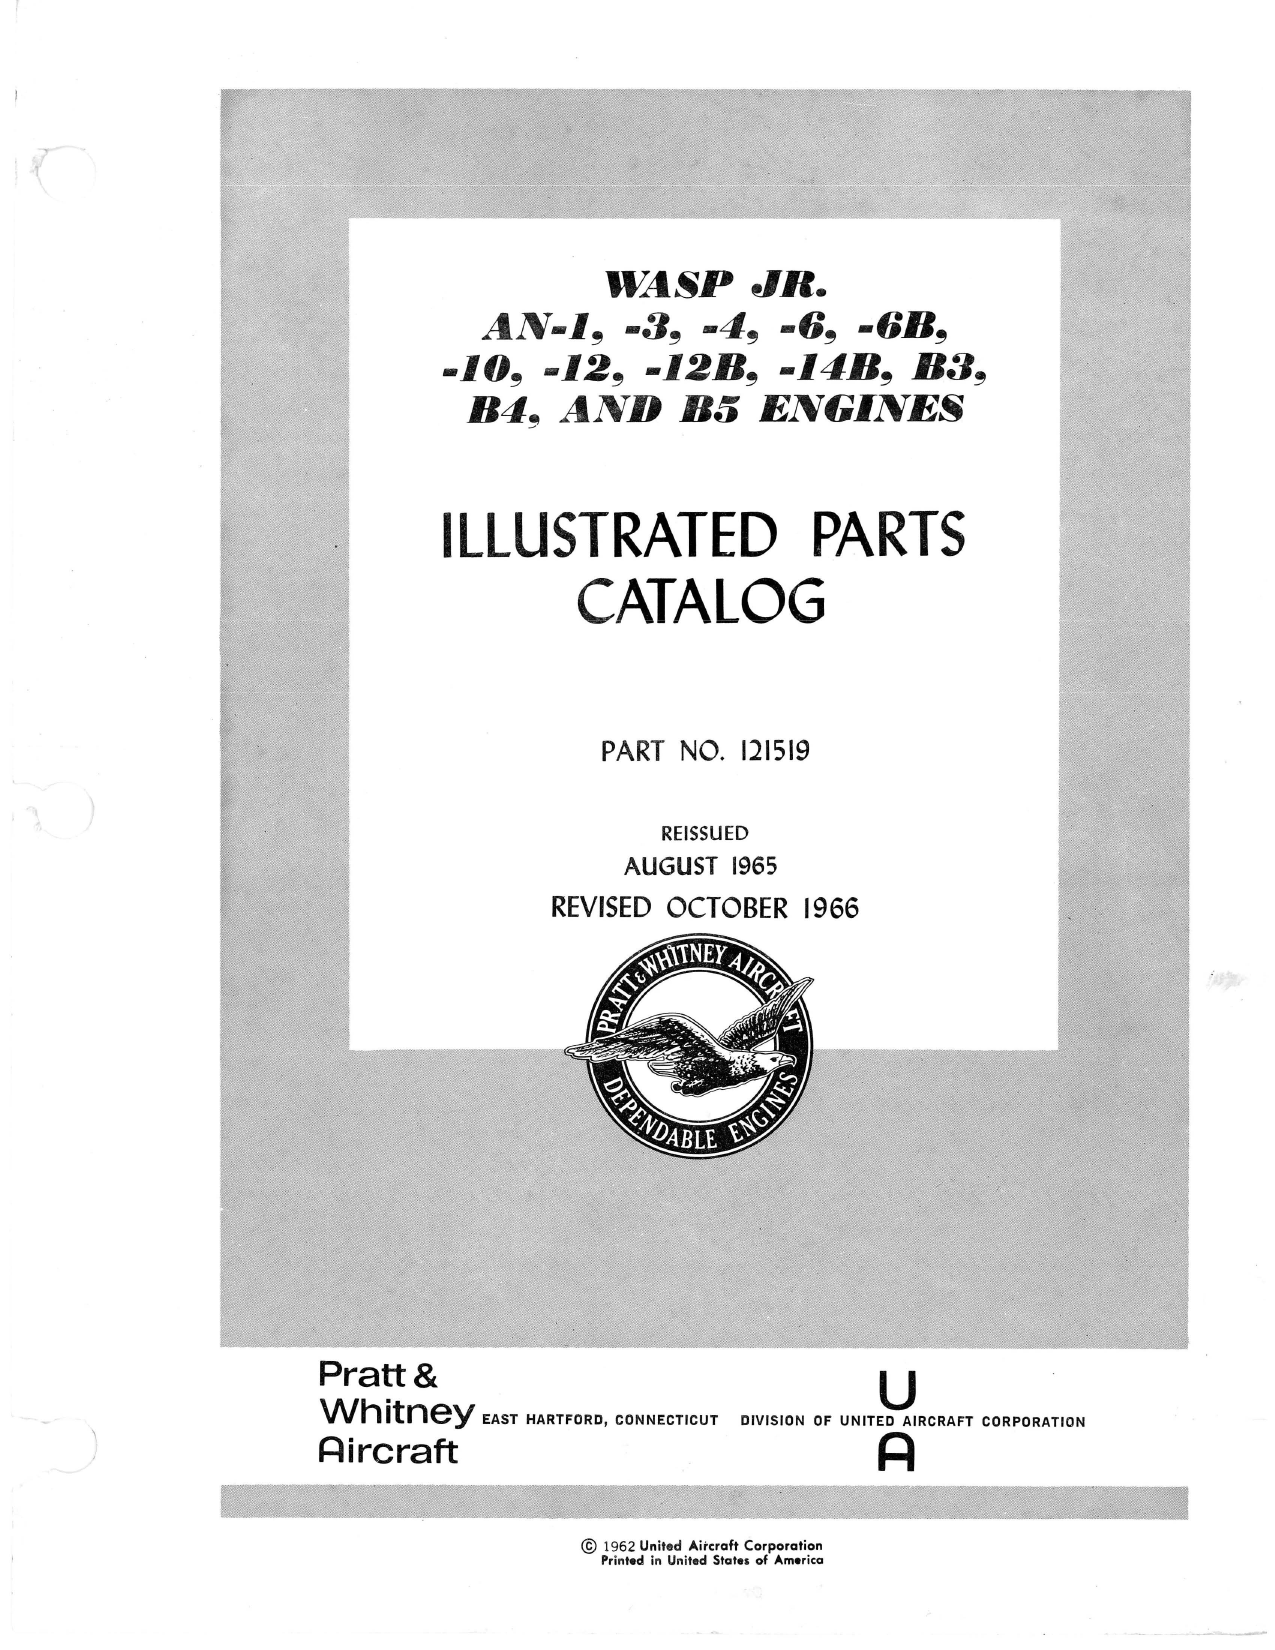 Sample page 1 from AirCorps Library document: Illustrated Parts Catalog - R-985